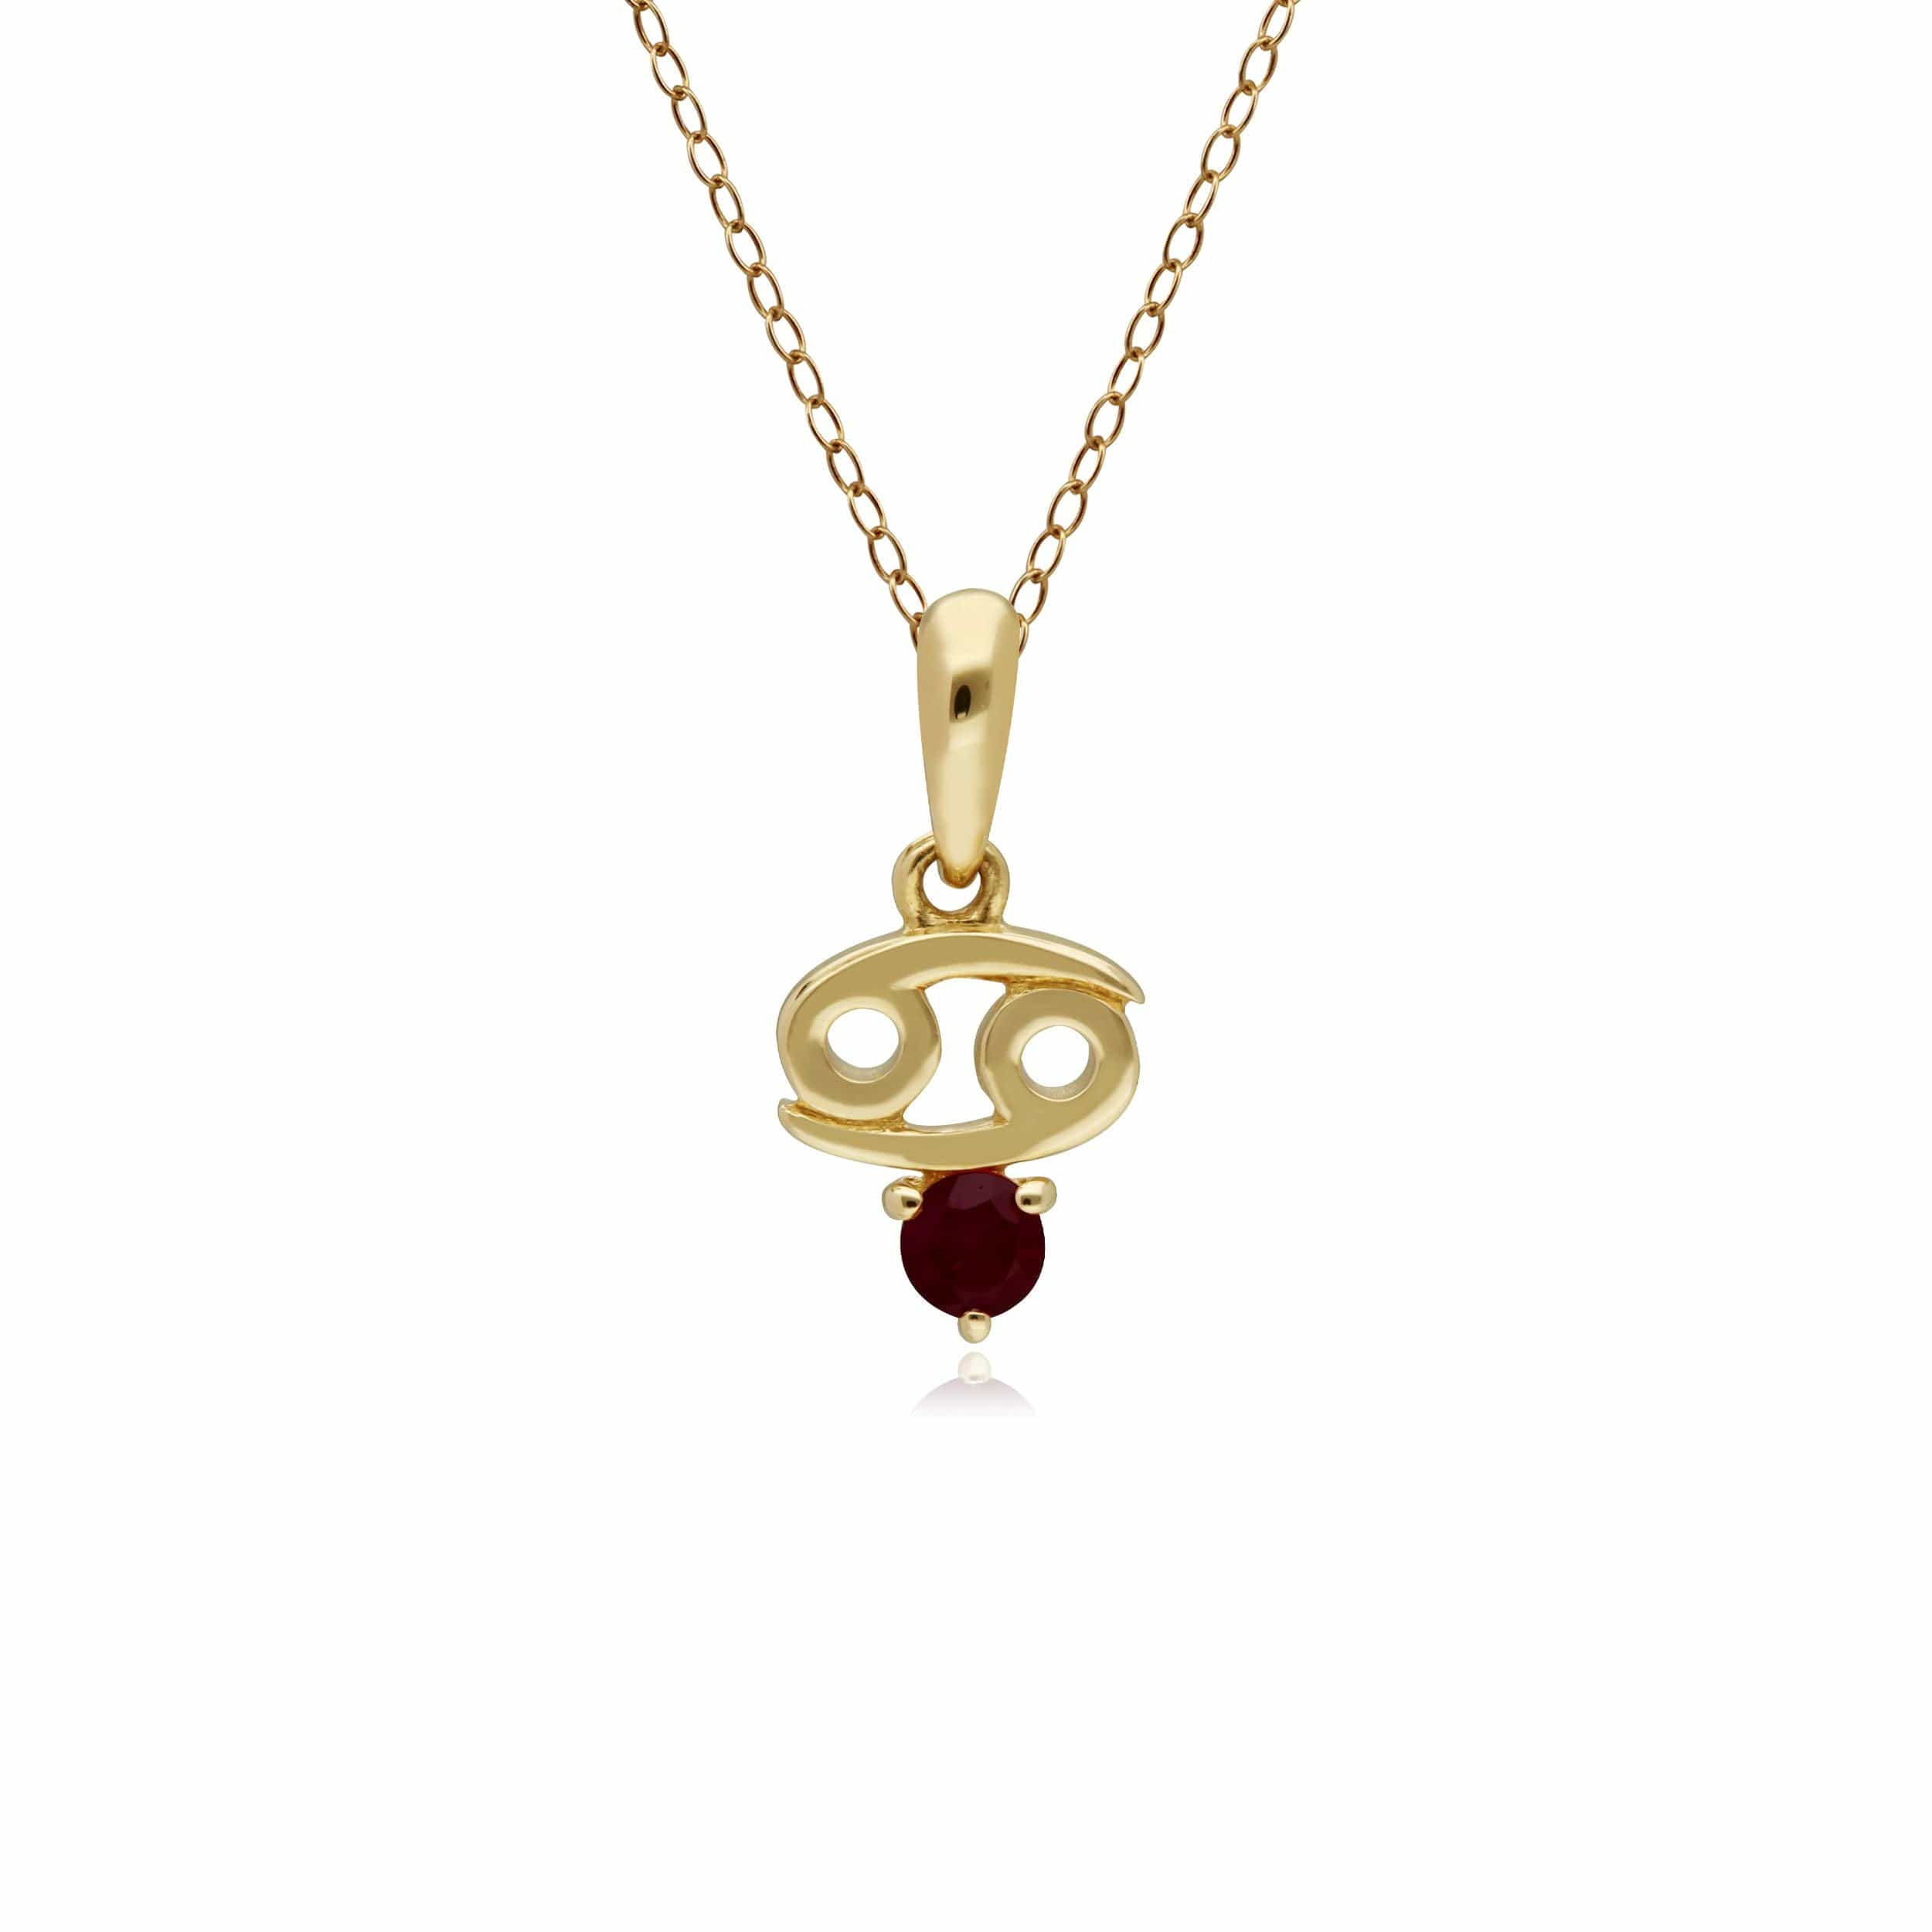 Photos - Pendant / Choker Necklace Ruby Cancer Zodiac Charm Necklace in 9ct Yellow Gold